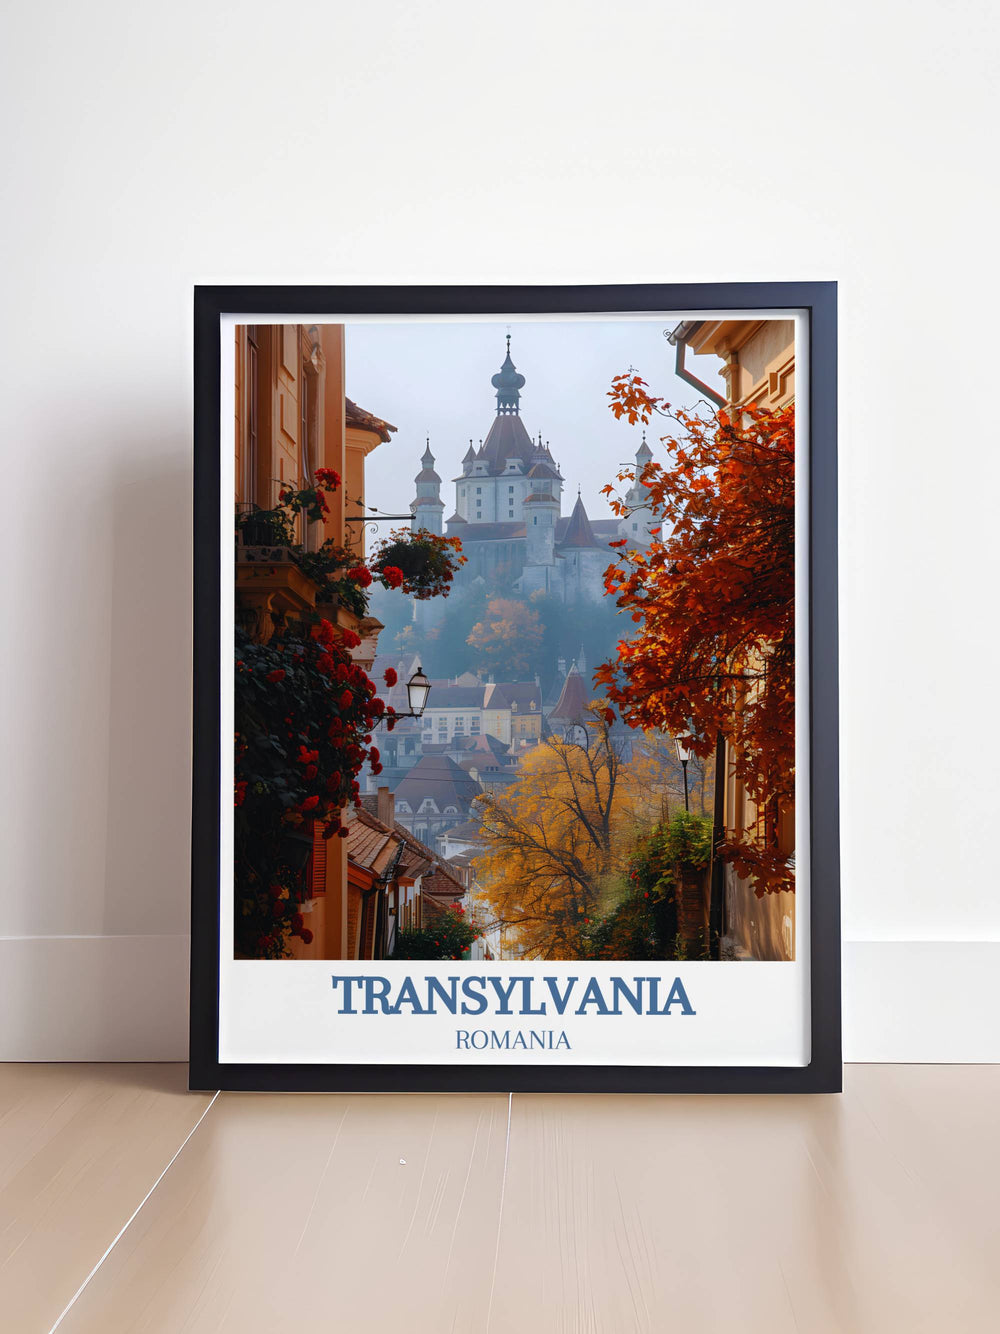 High quality print of Sighișoara Citadel, showcasing the unique architecture and vibrant colors of this UNESCO World Heritage site, perfect for adding a touch of Romanian elegance to your home decor.